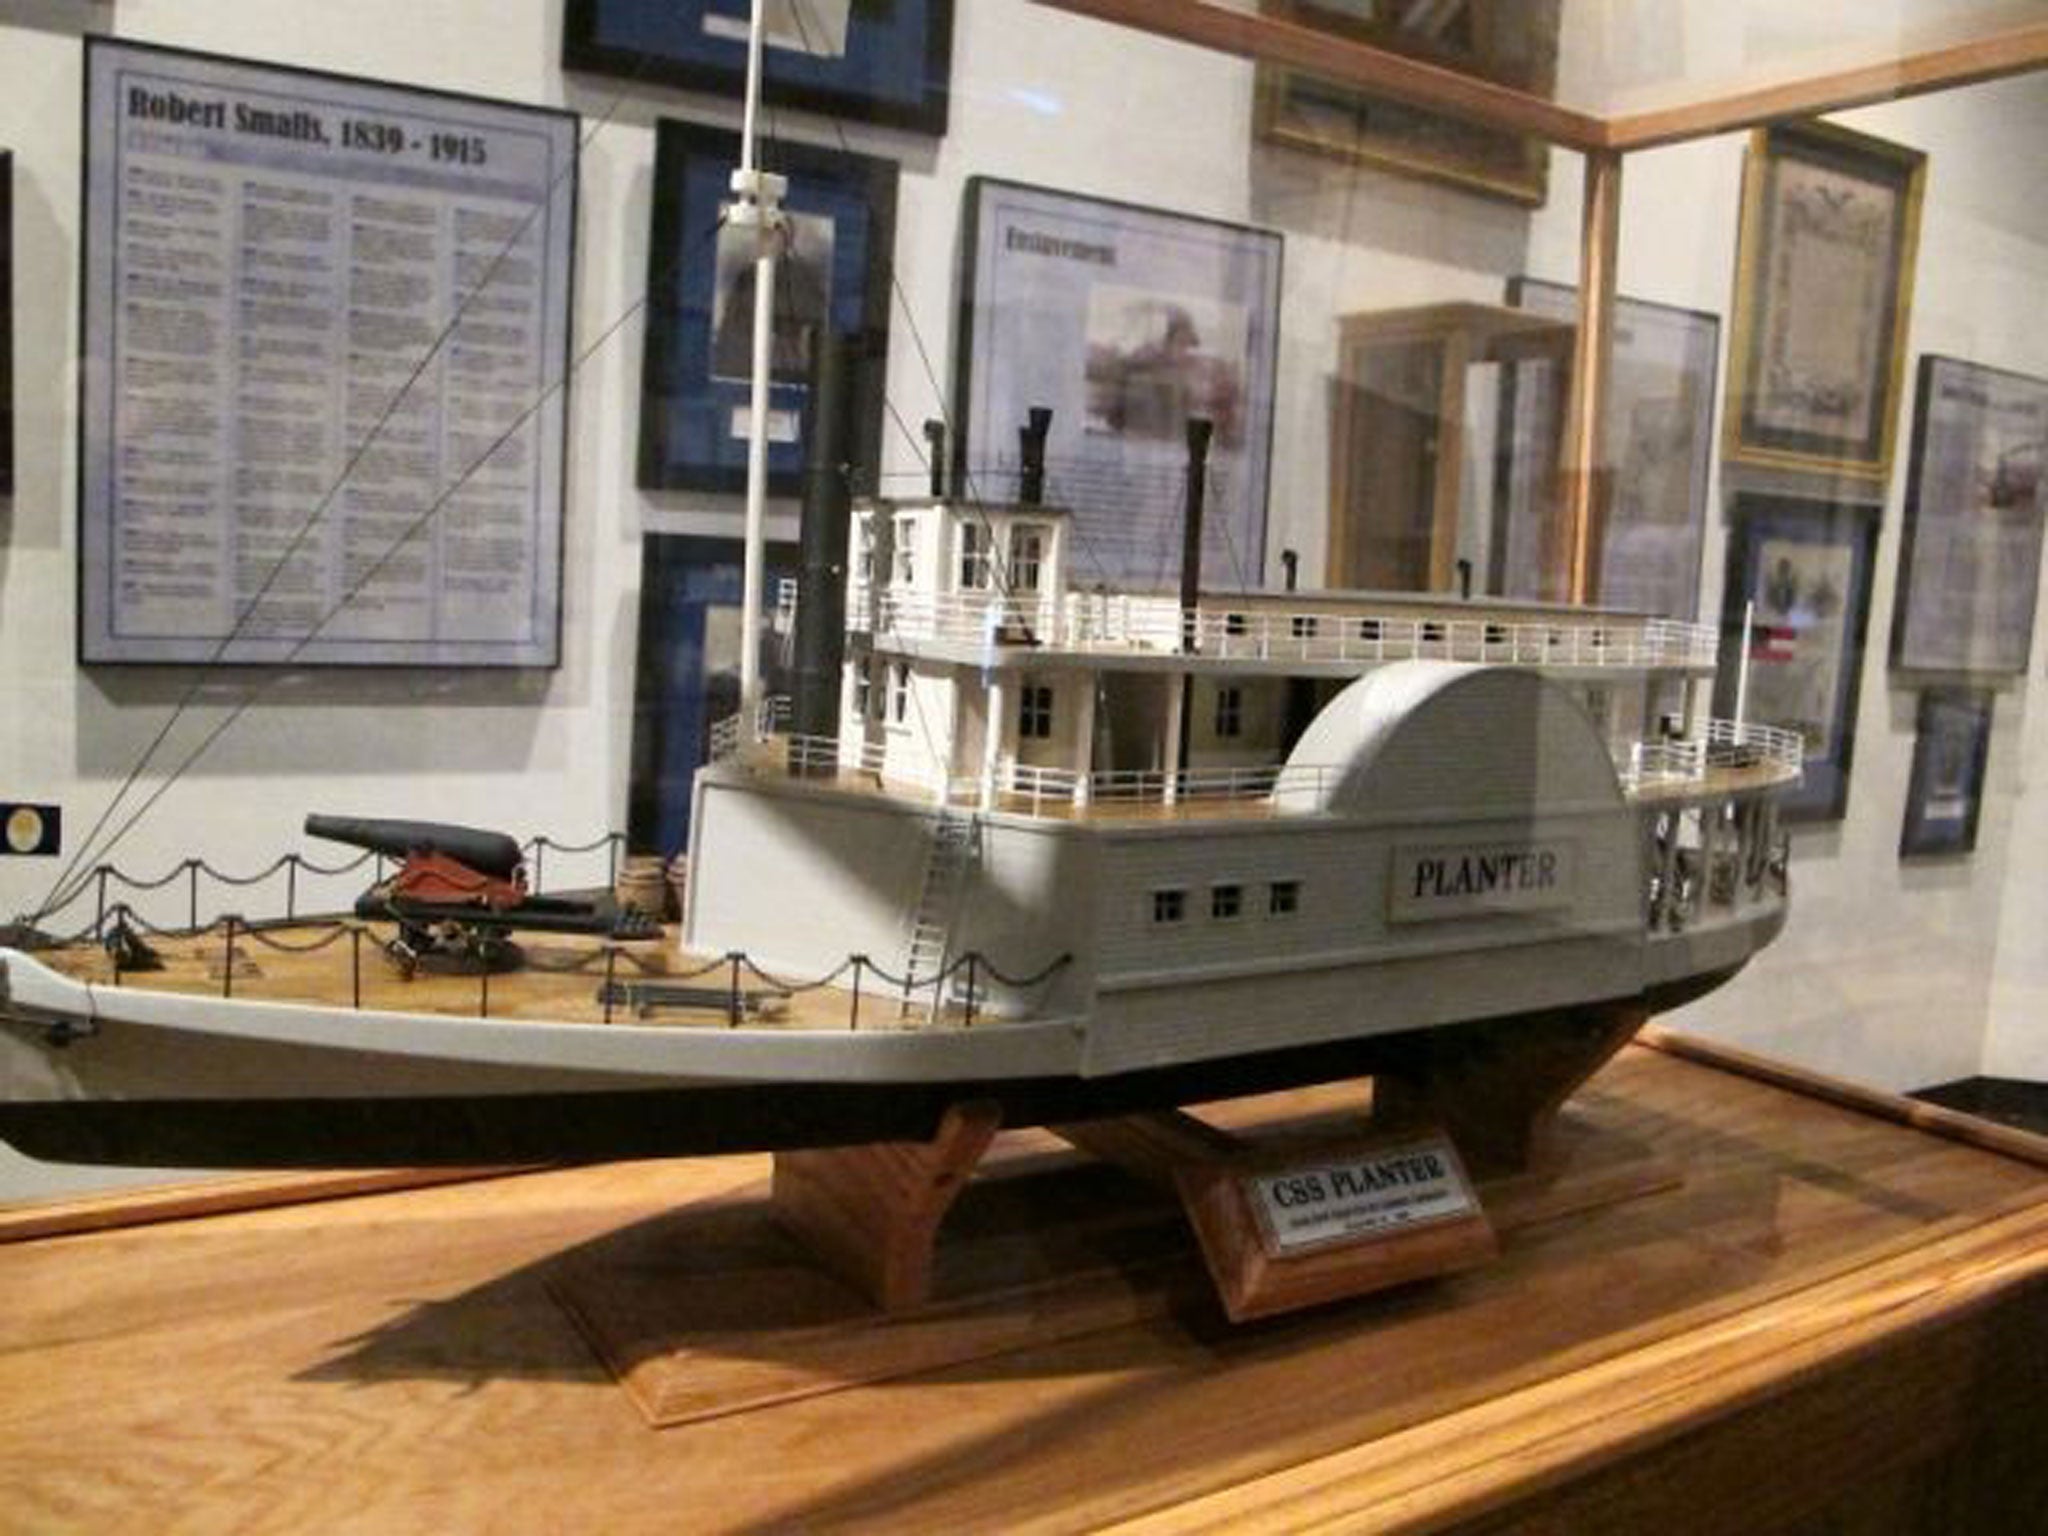 A model of the CSS Planter at the Charleston Museum in Charleston, South Carolina, which is part of an exhibit entitled "The Life and Times of Congressman Robert Smalls"